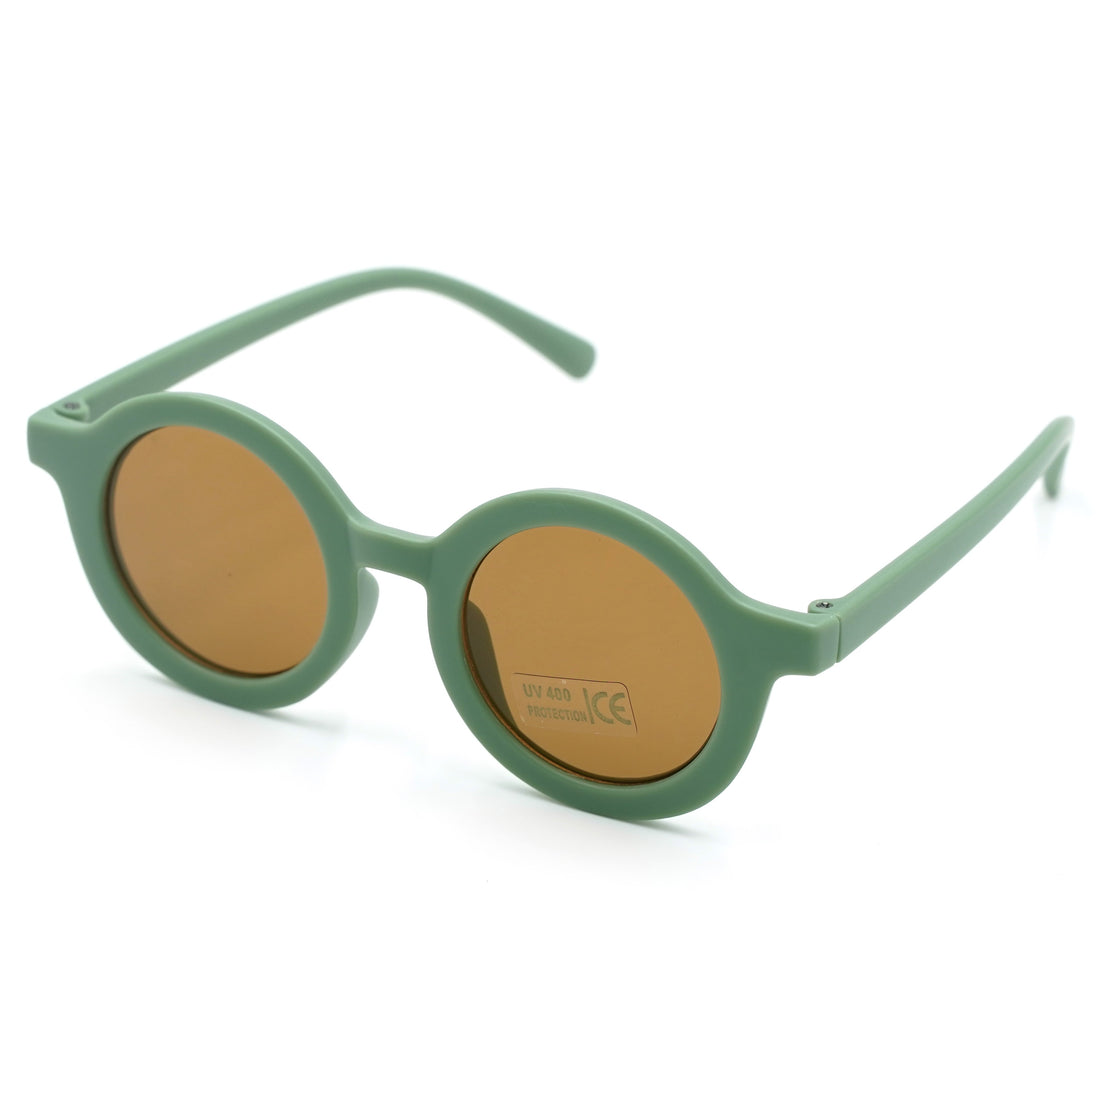 UV Protected Sunglass - Vintage green